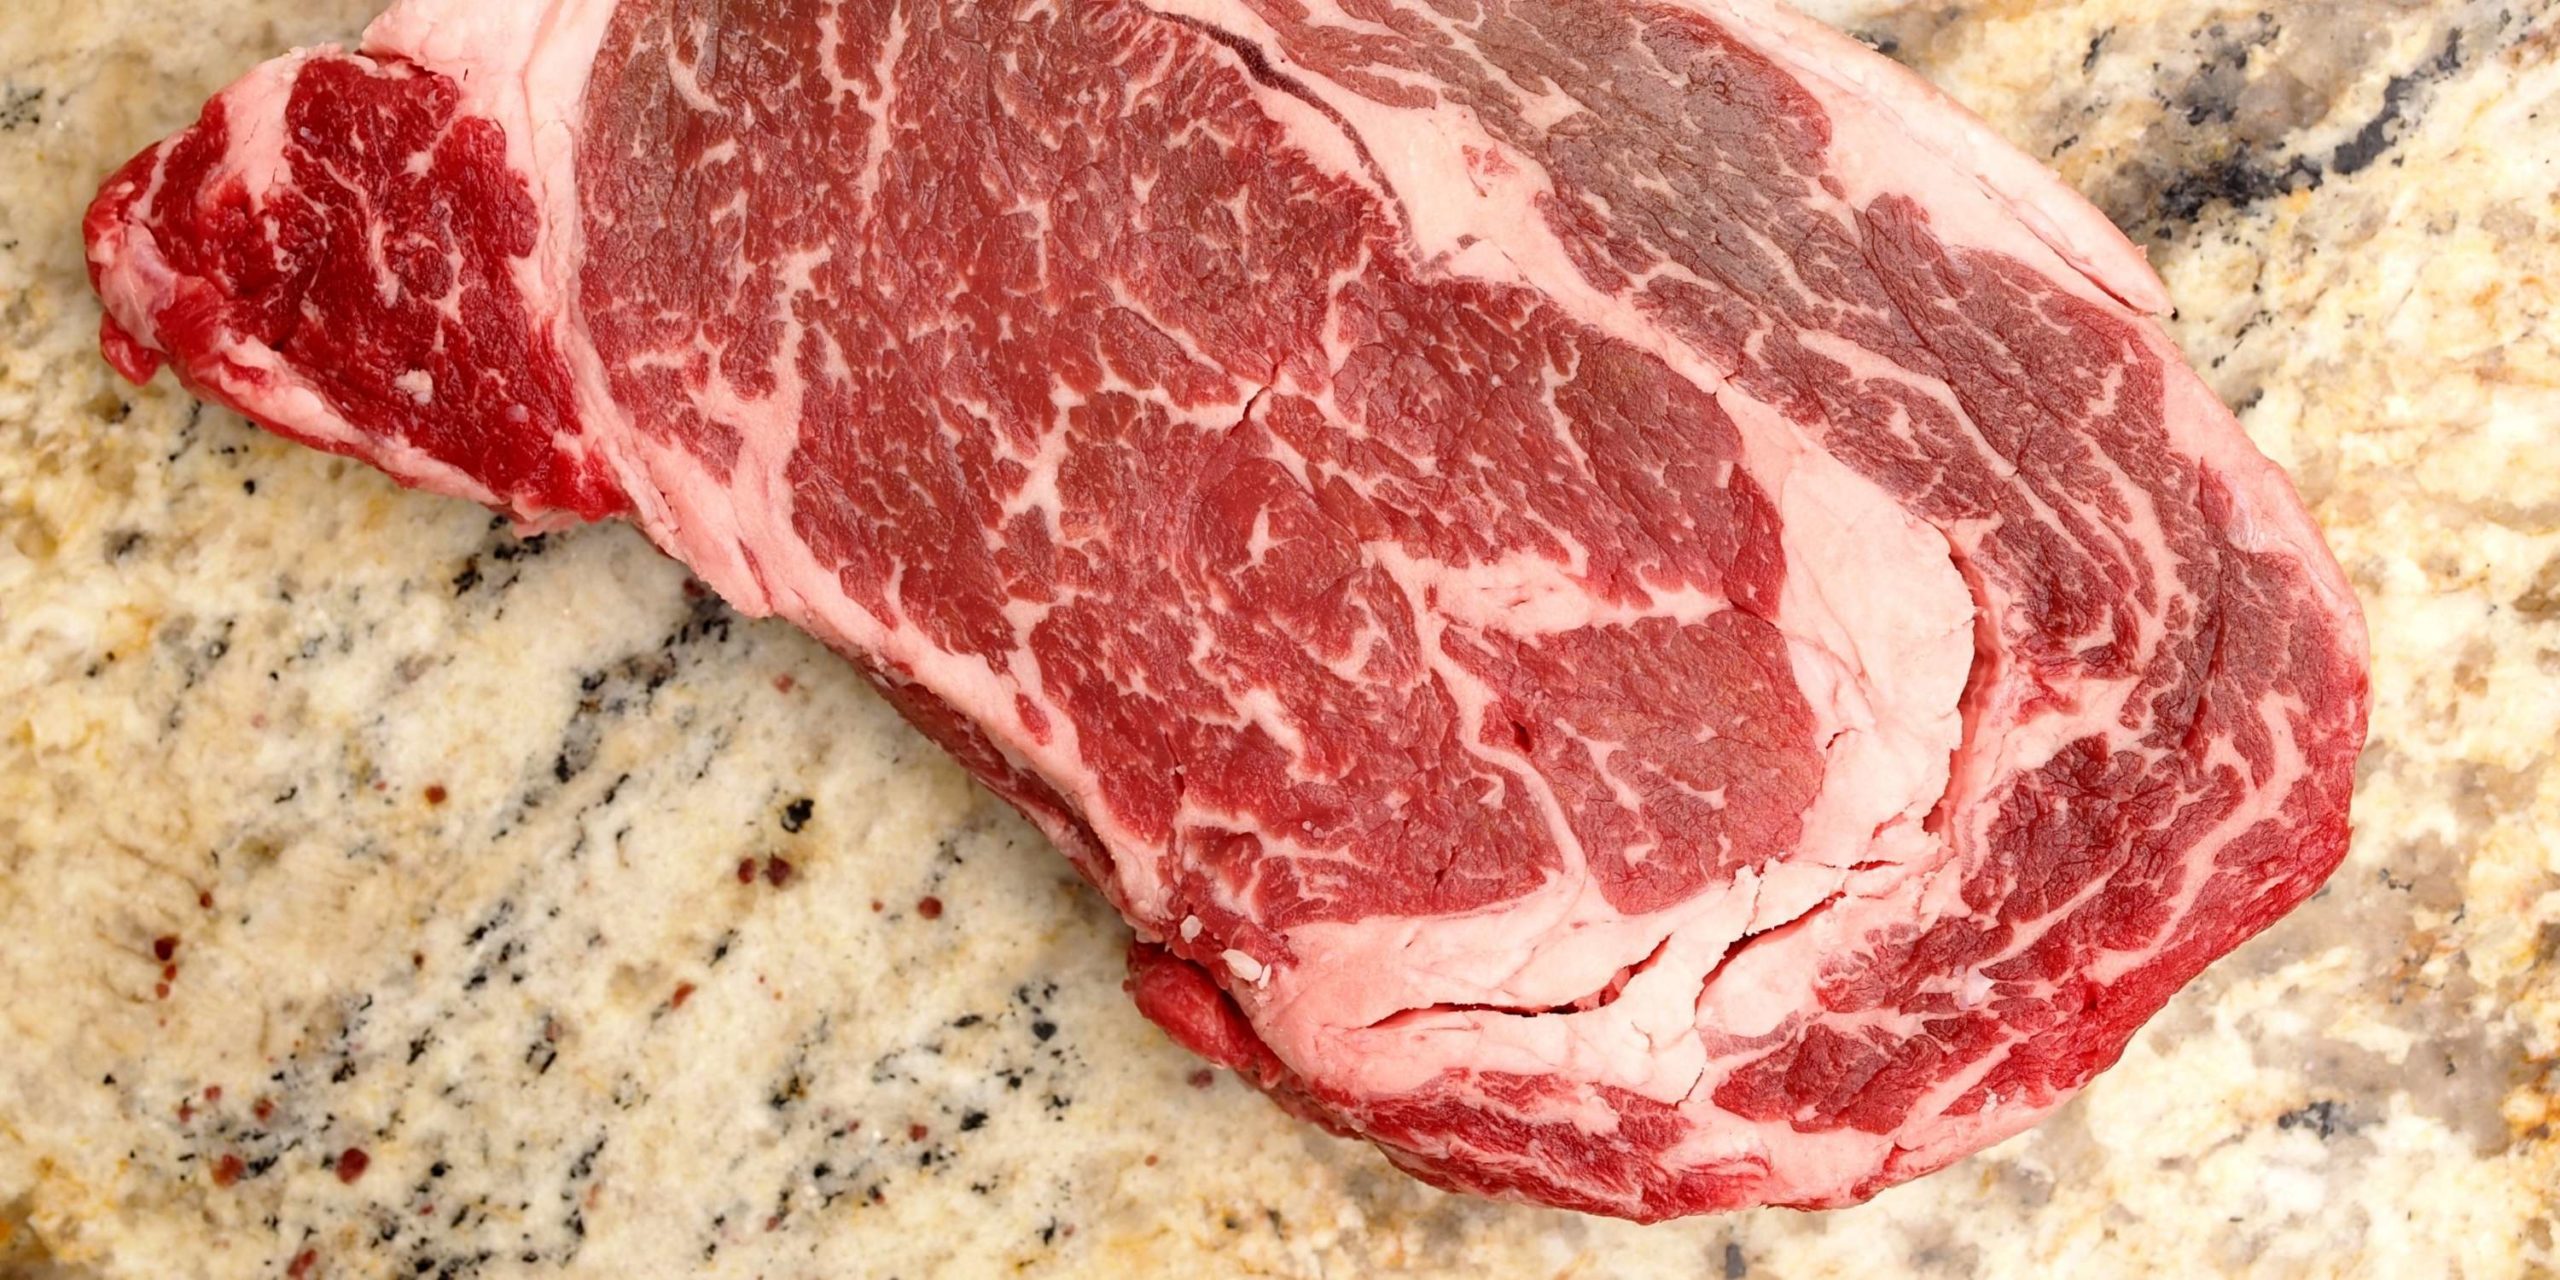 Prime USDA beef available at La Boucherie, the leading gourmet butcher in Malta